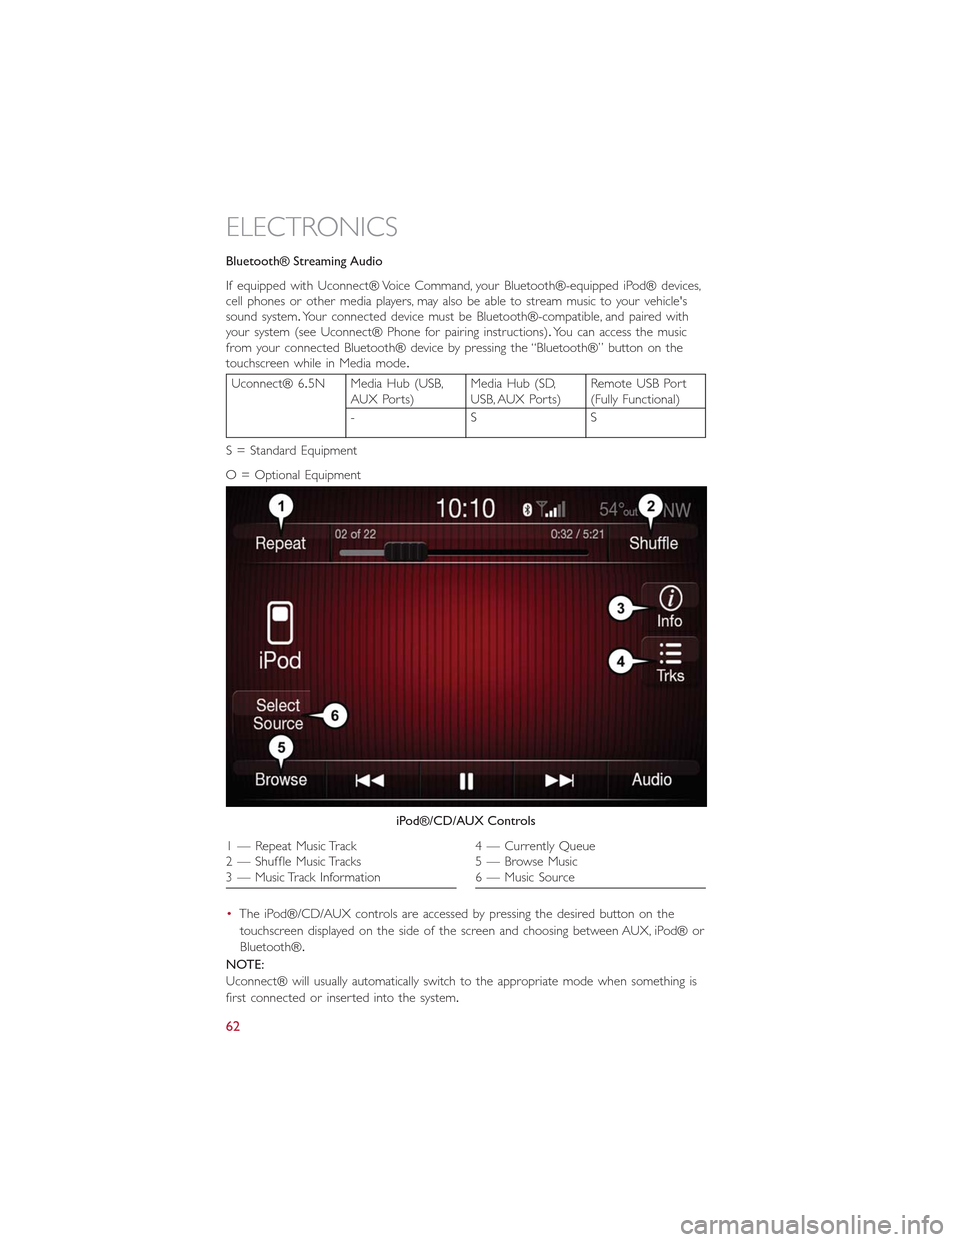 FIAT 500L 2015 2.G User Guide Bluetooth® Streaming Audio
If equipped with Uconnect® Voice Command, your Bluetooth®-equipped iPod® devices,cell phones or other media players, may also be able to stream music to your vehiclesso